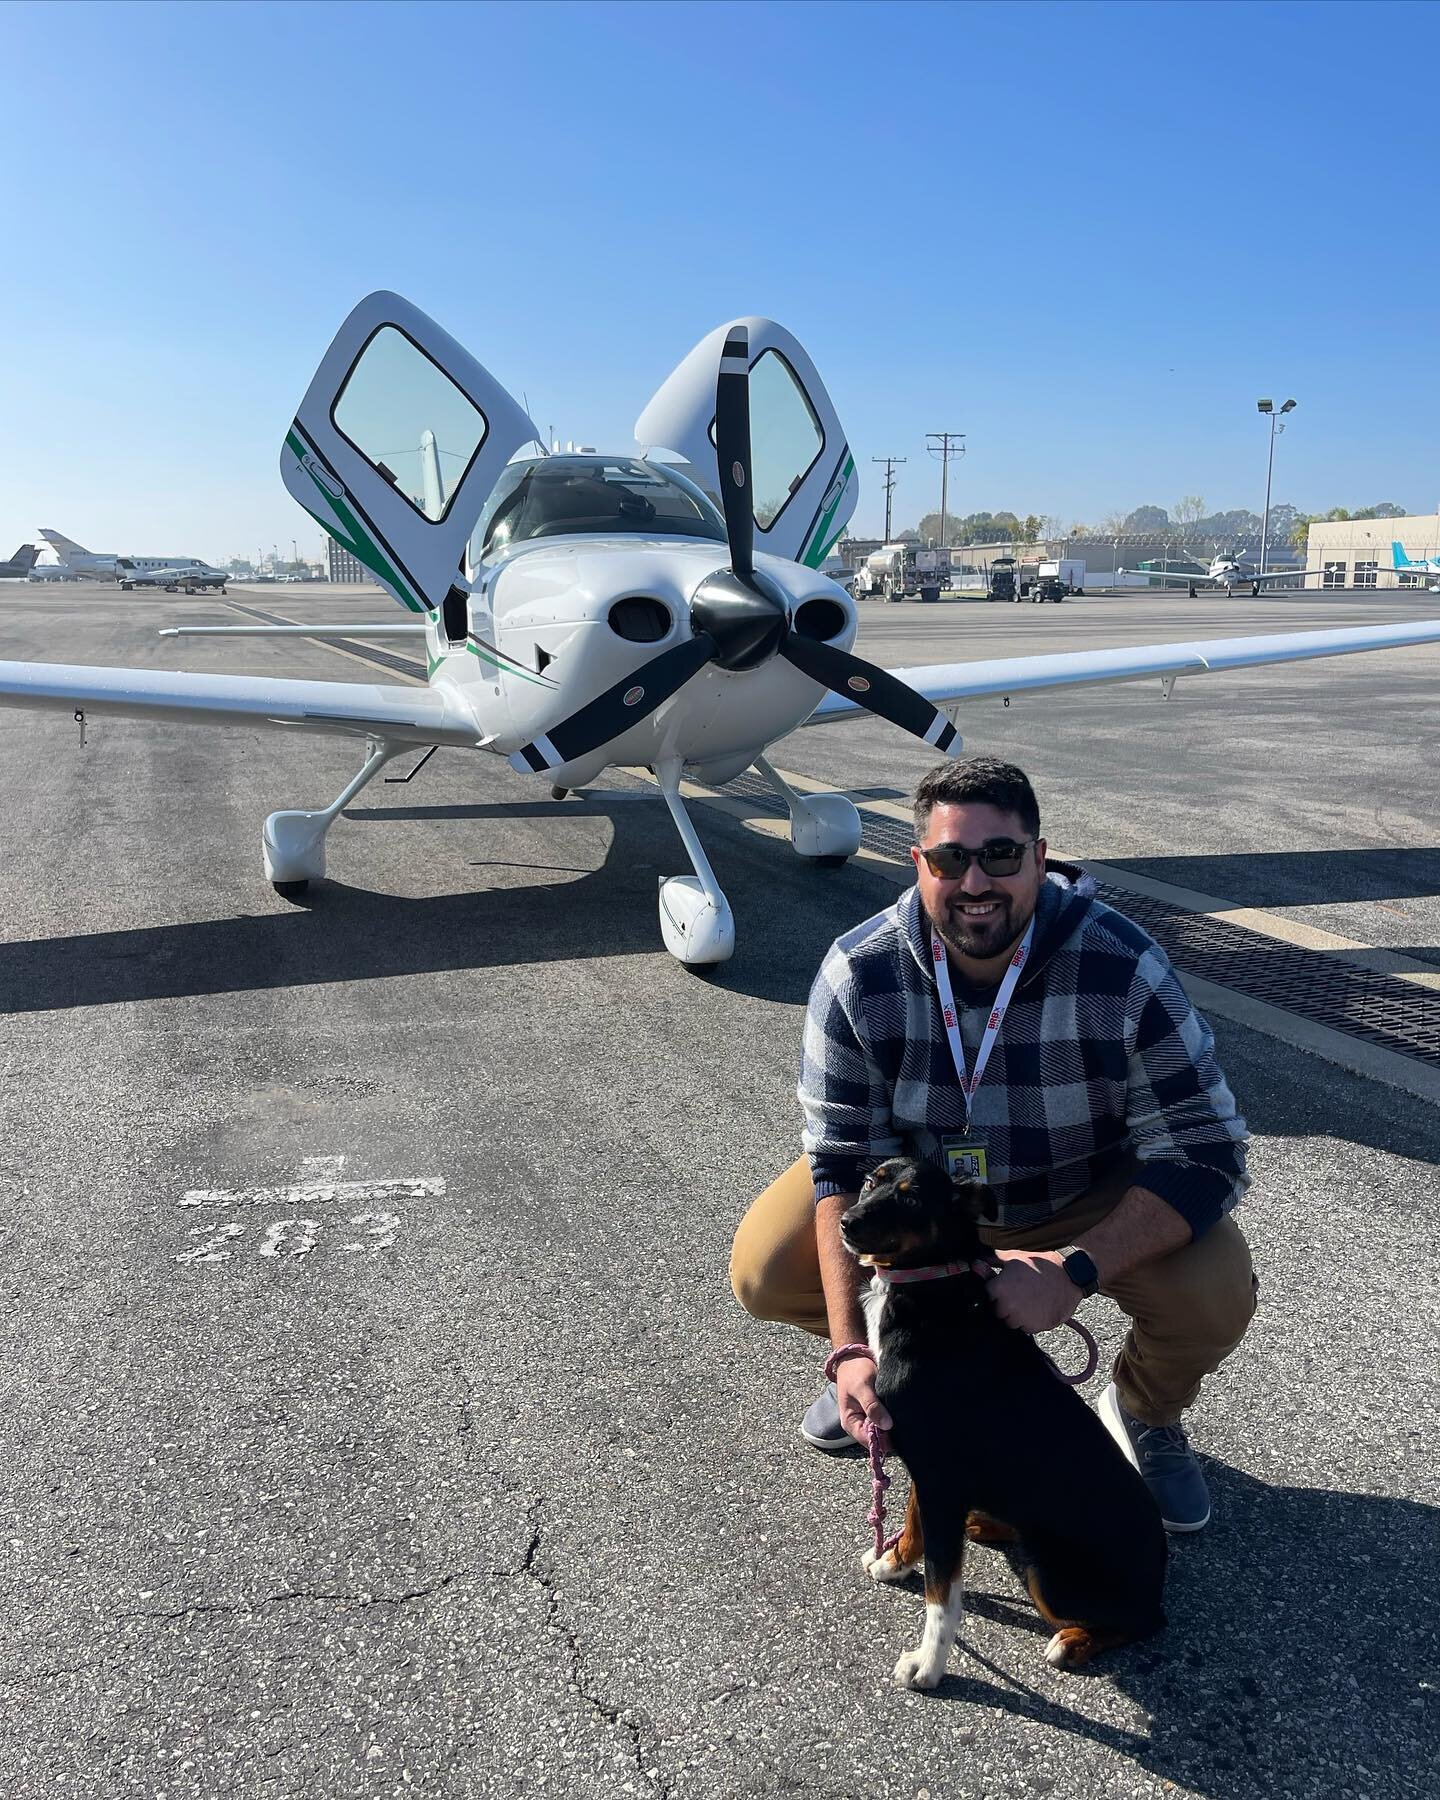 Meet our CSIP, Brian Bernfeld!

Brian is the Cirrus Standardized Instructor Pilot (CSIP) for BRB Aviation. A first generation pilot, Brian learned to fly in Florida, where he was born and raised. After becoming a CSIP and moving out to California in 